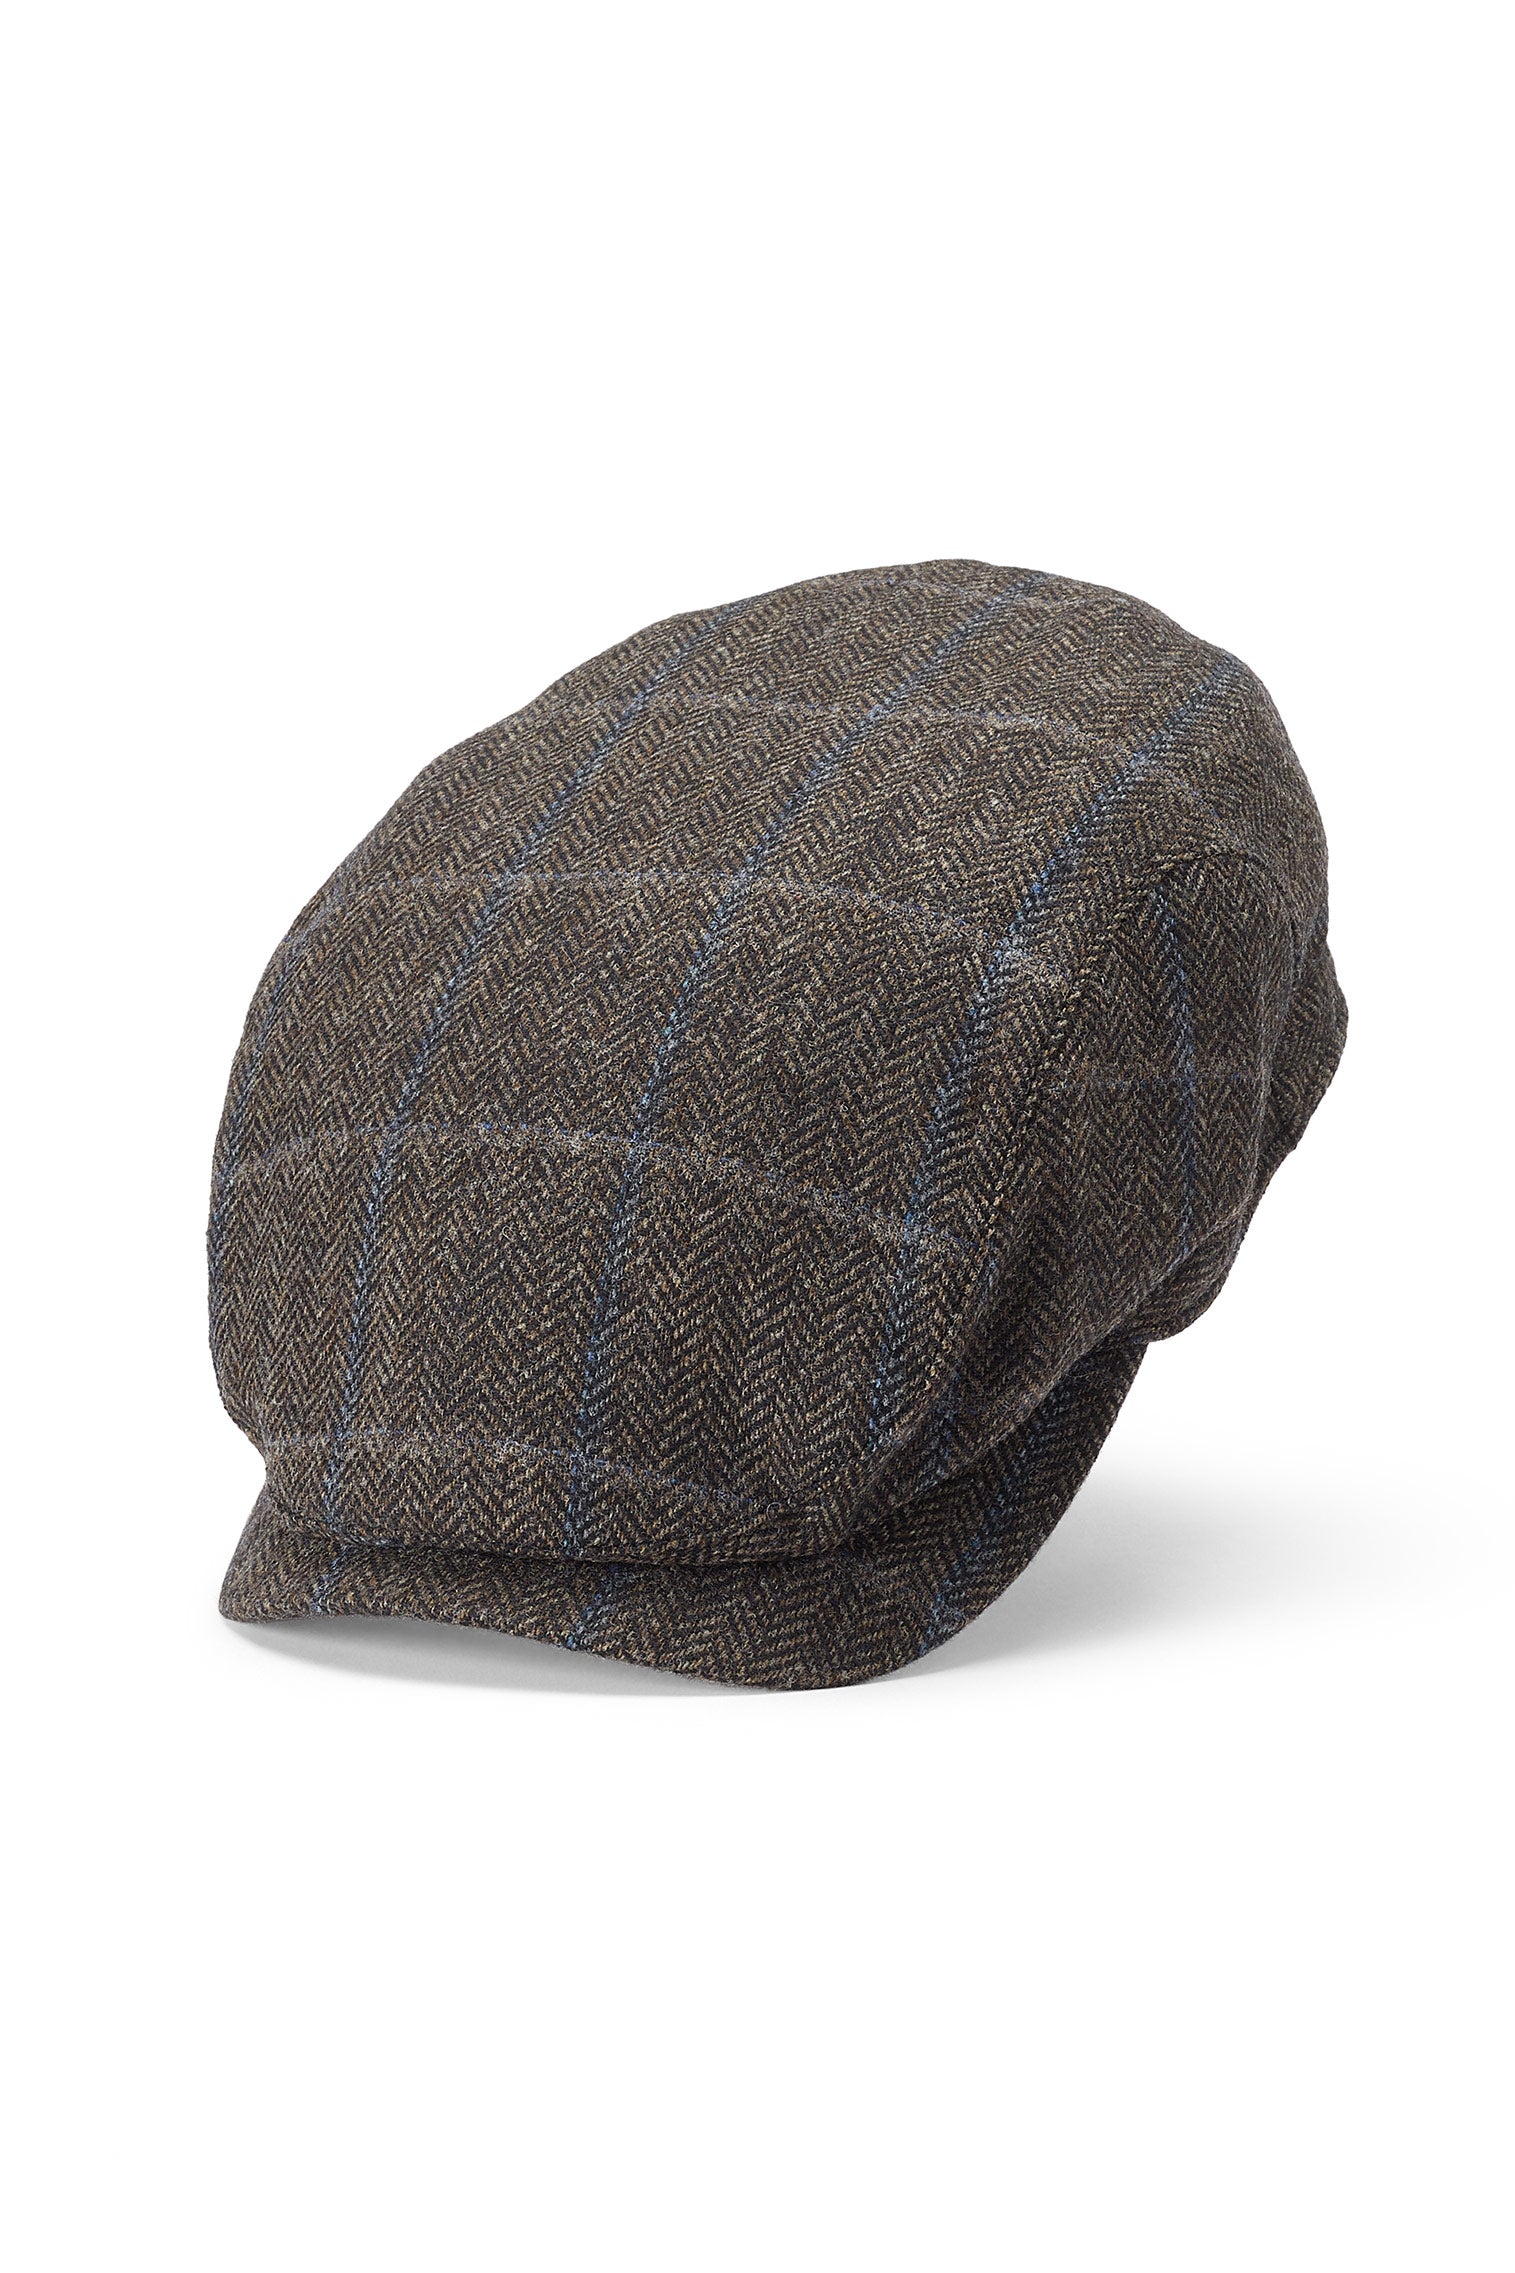 Lynton Brown Flat Cap - Hats for Oval Face Shapes - Lock & Co. Hatters London UK